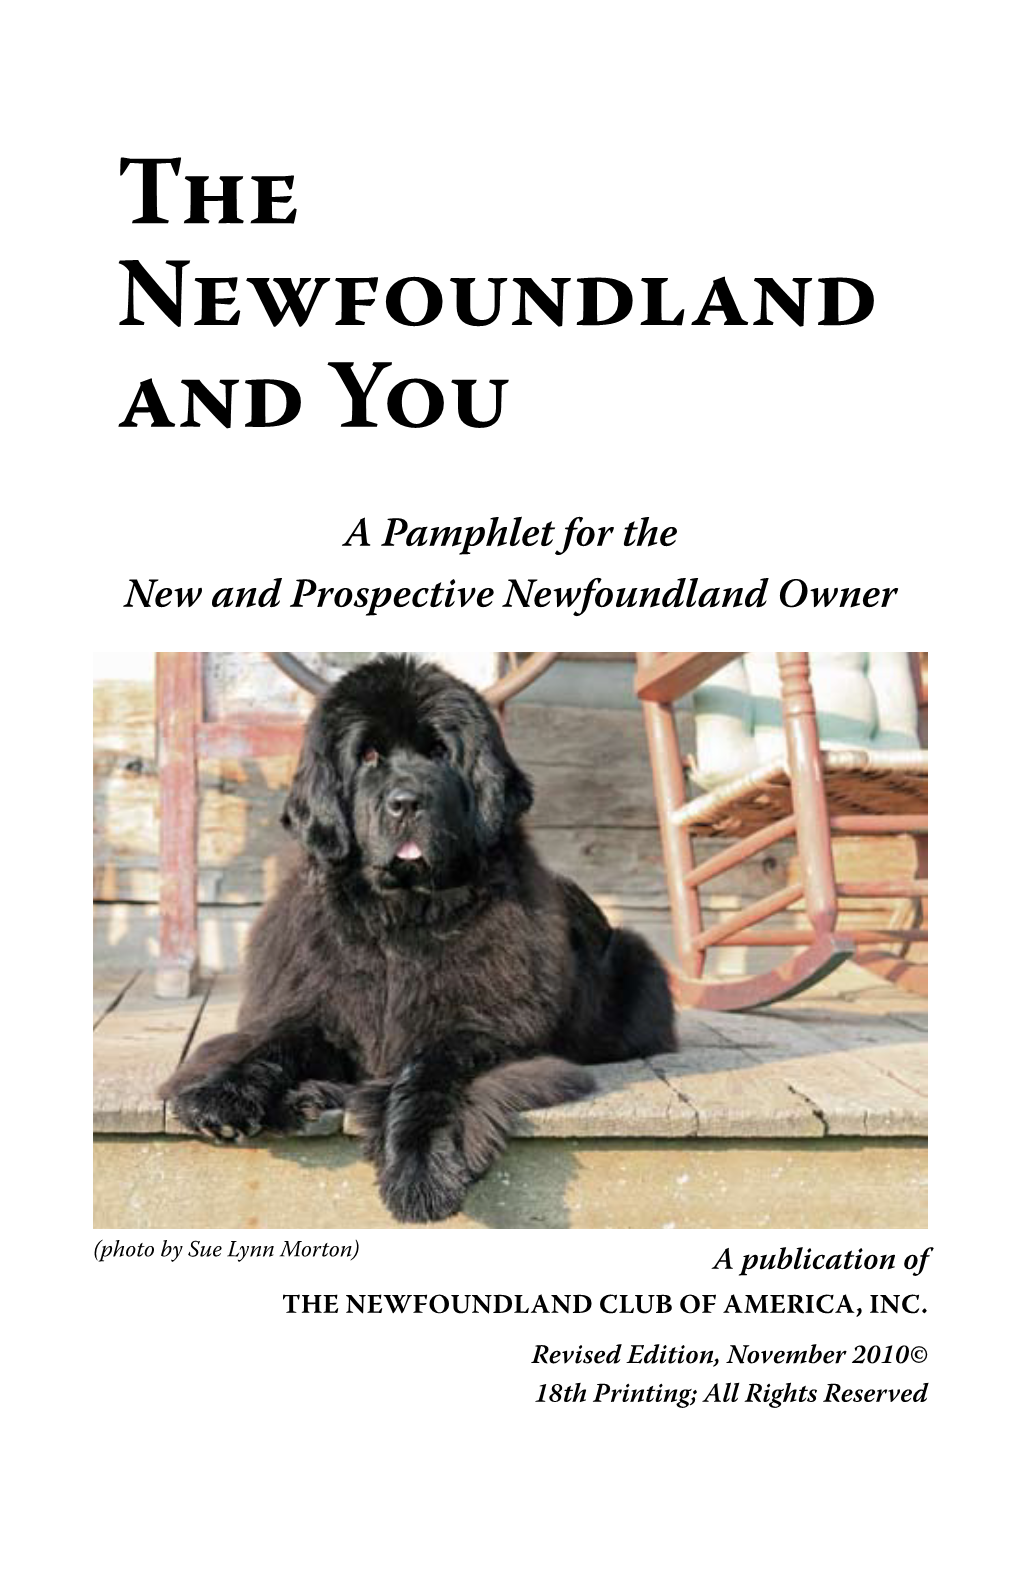 The Newfoundland and You